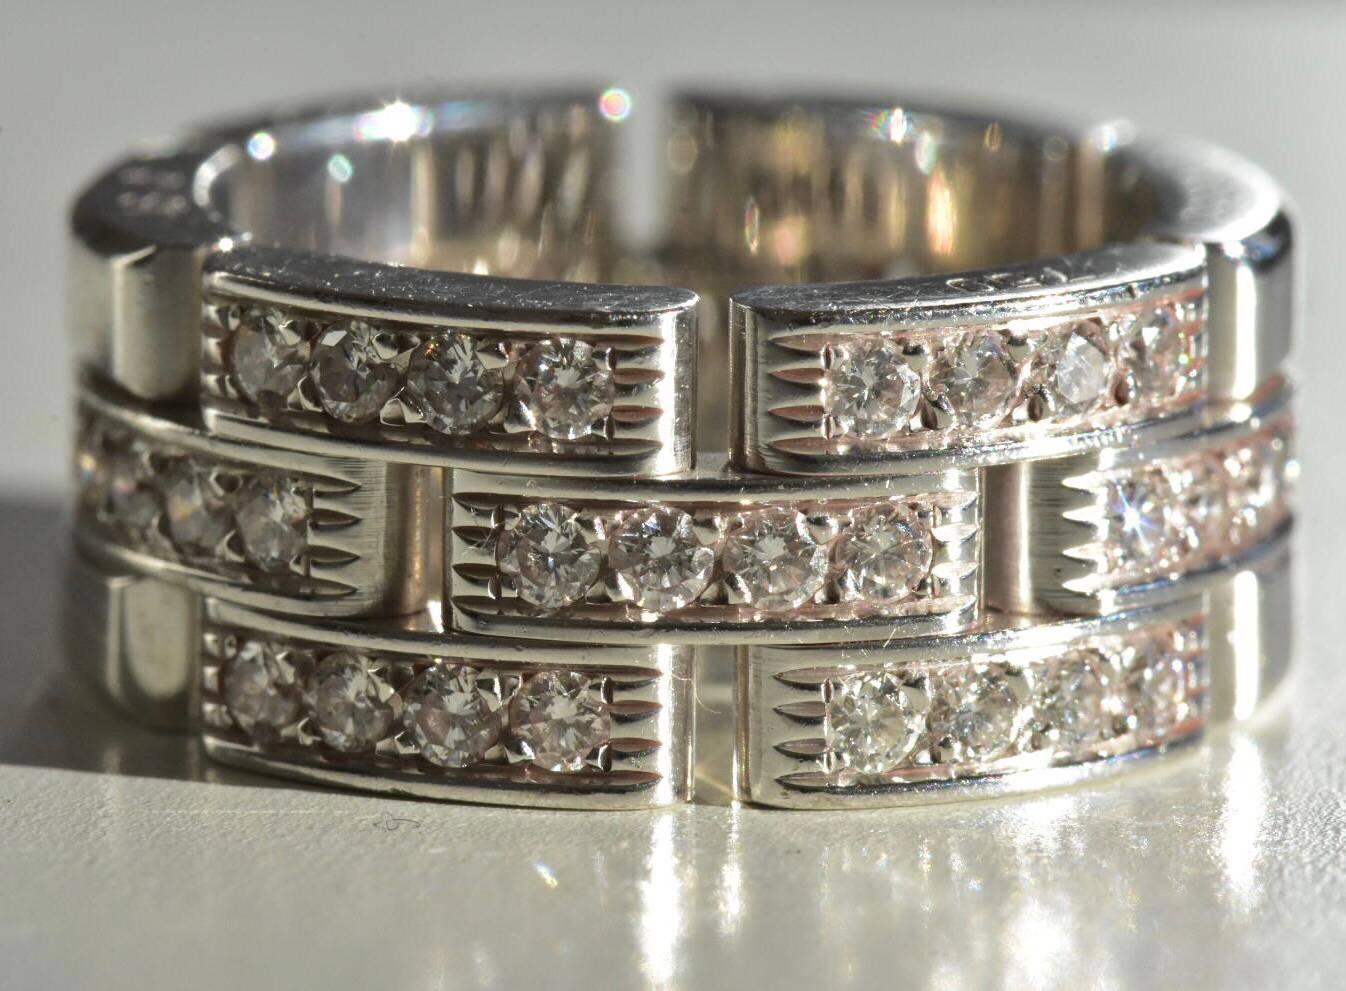 A Cartier Maillon Panthere three row half diamond ring set in 18k yellow gold. The is from the Cartier Panthere Links & Chains collection and features 35 pave set brilliant cut round diamonds in a link style band. The ring currently retails on